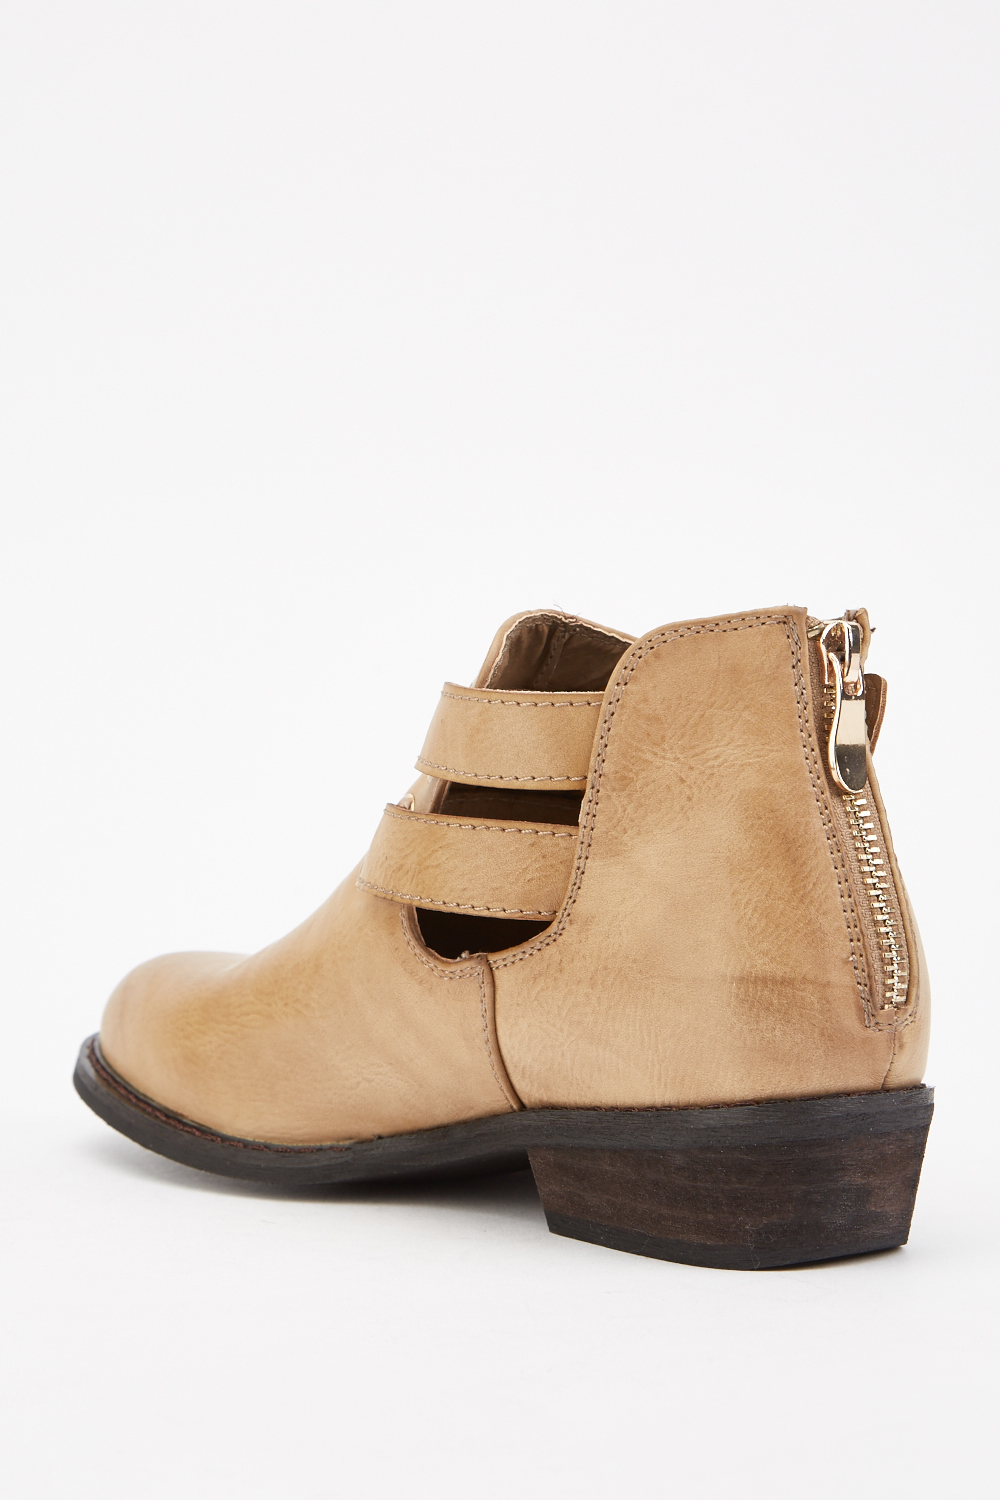 Buckled Side Ankle Boots - Just $3